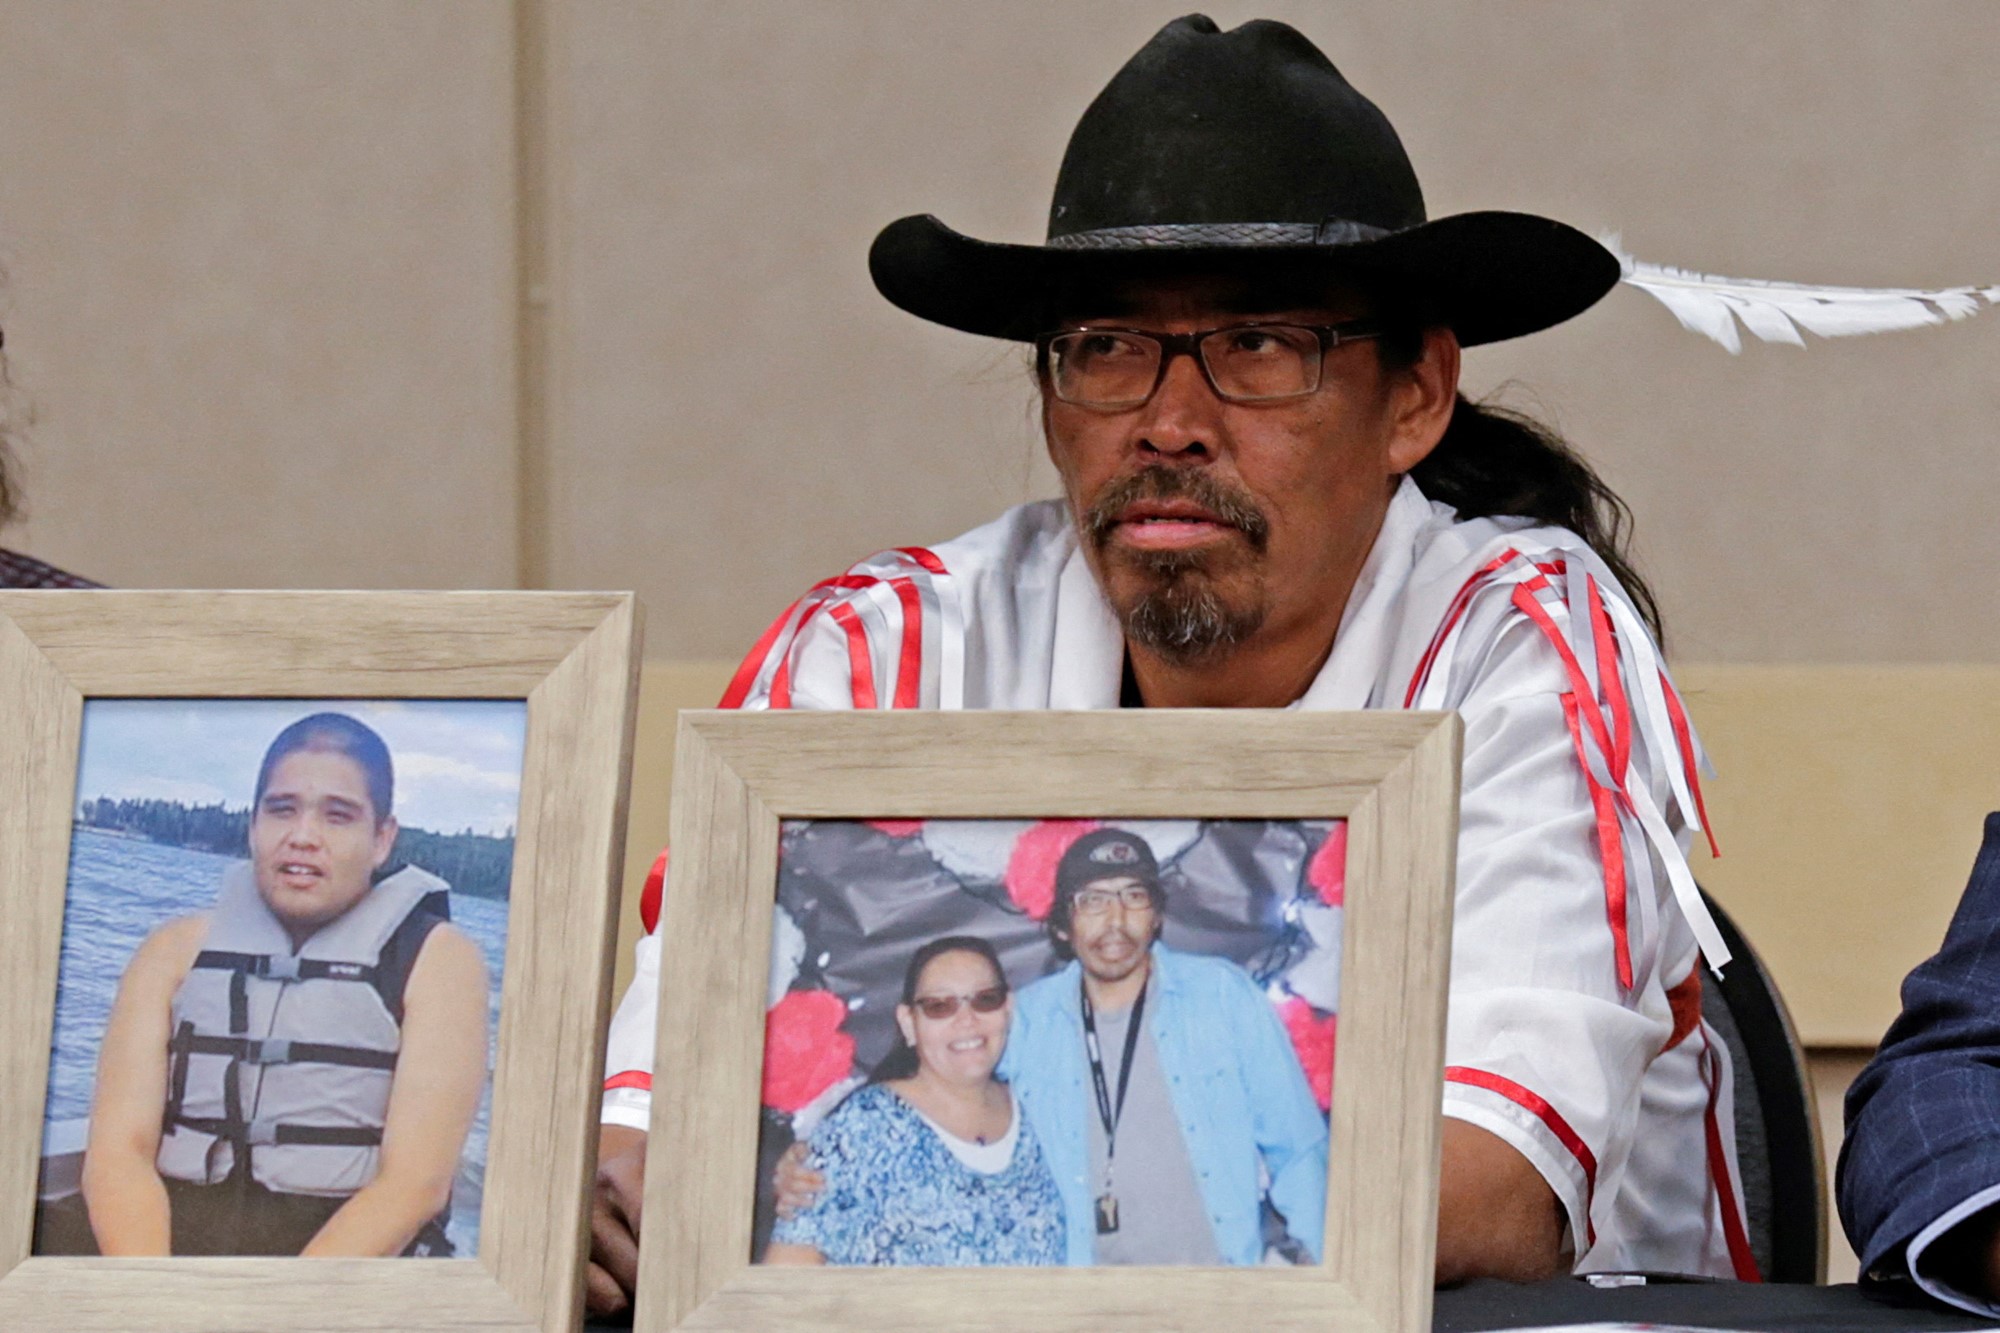 a man wearing a black hat sits at a desk behind framed photographs of stabbing victims